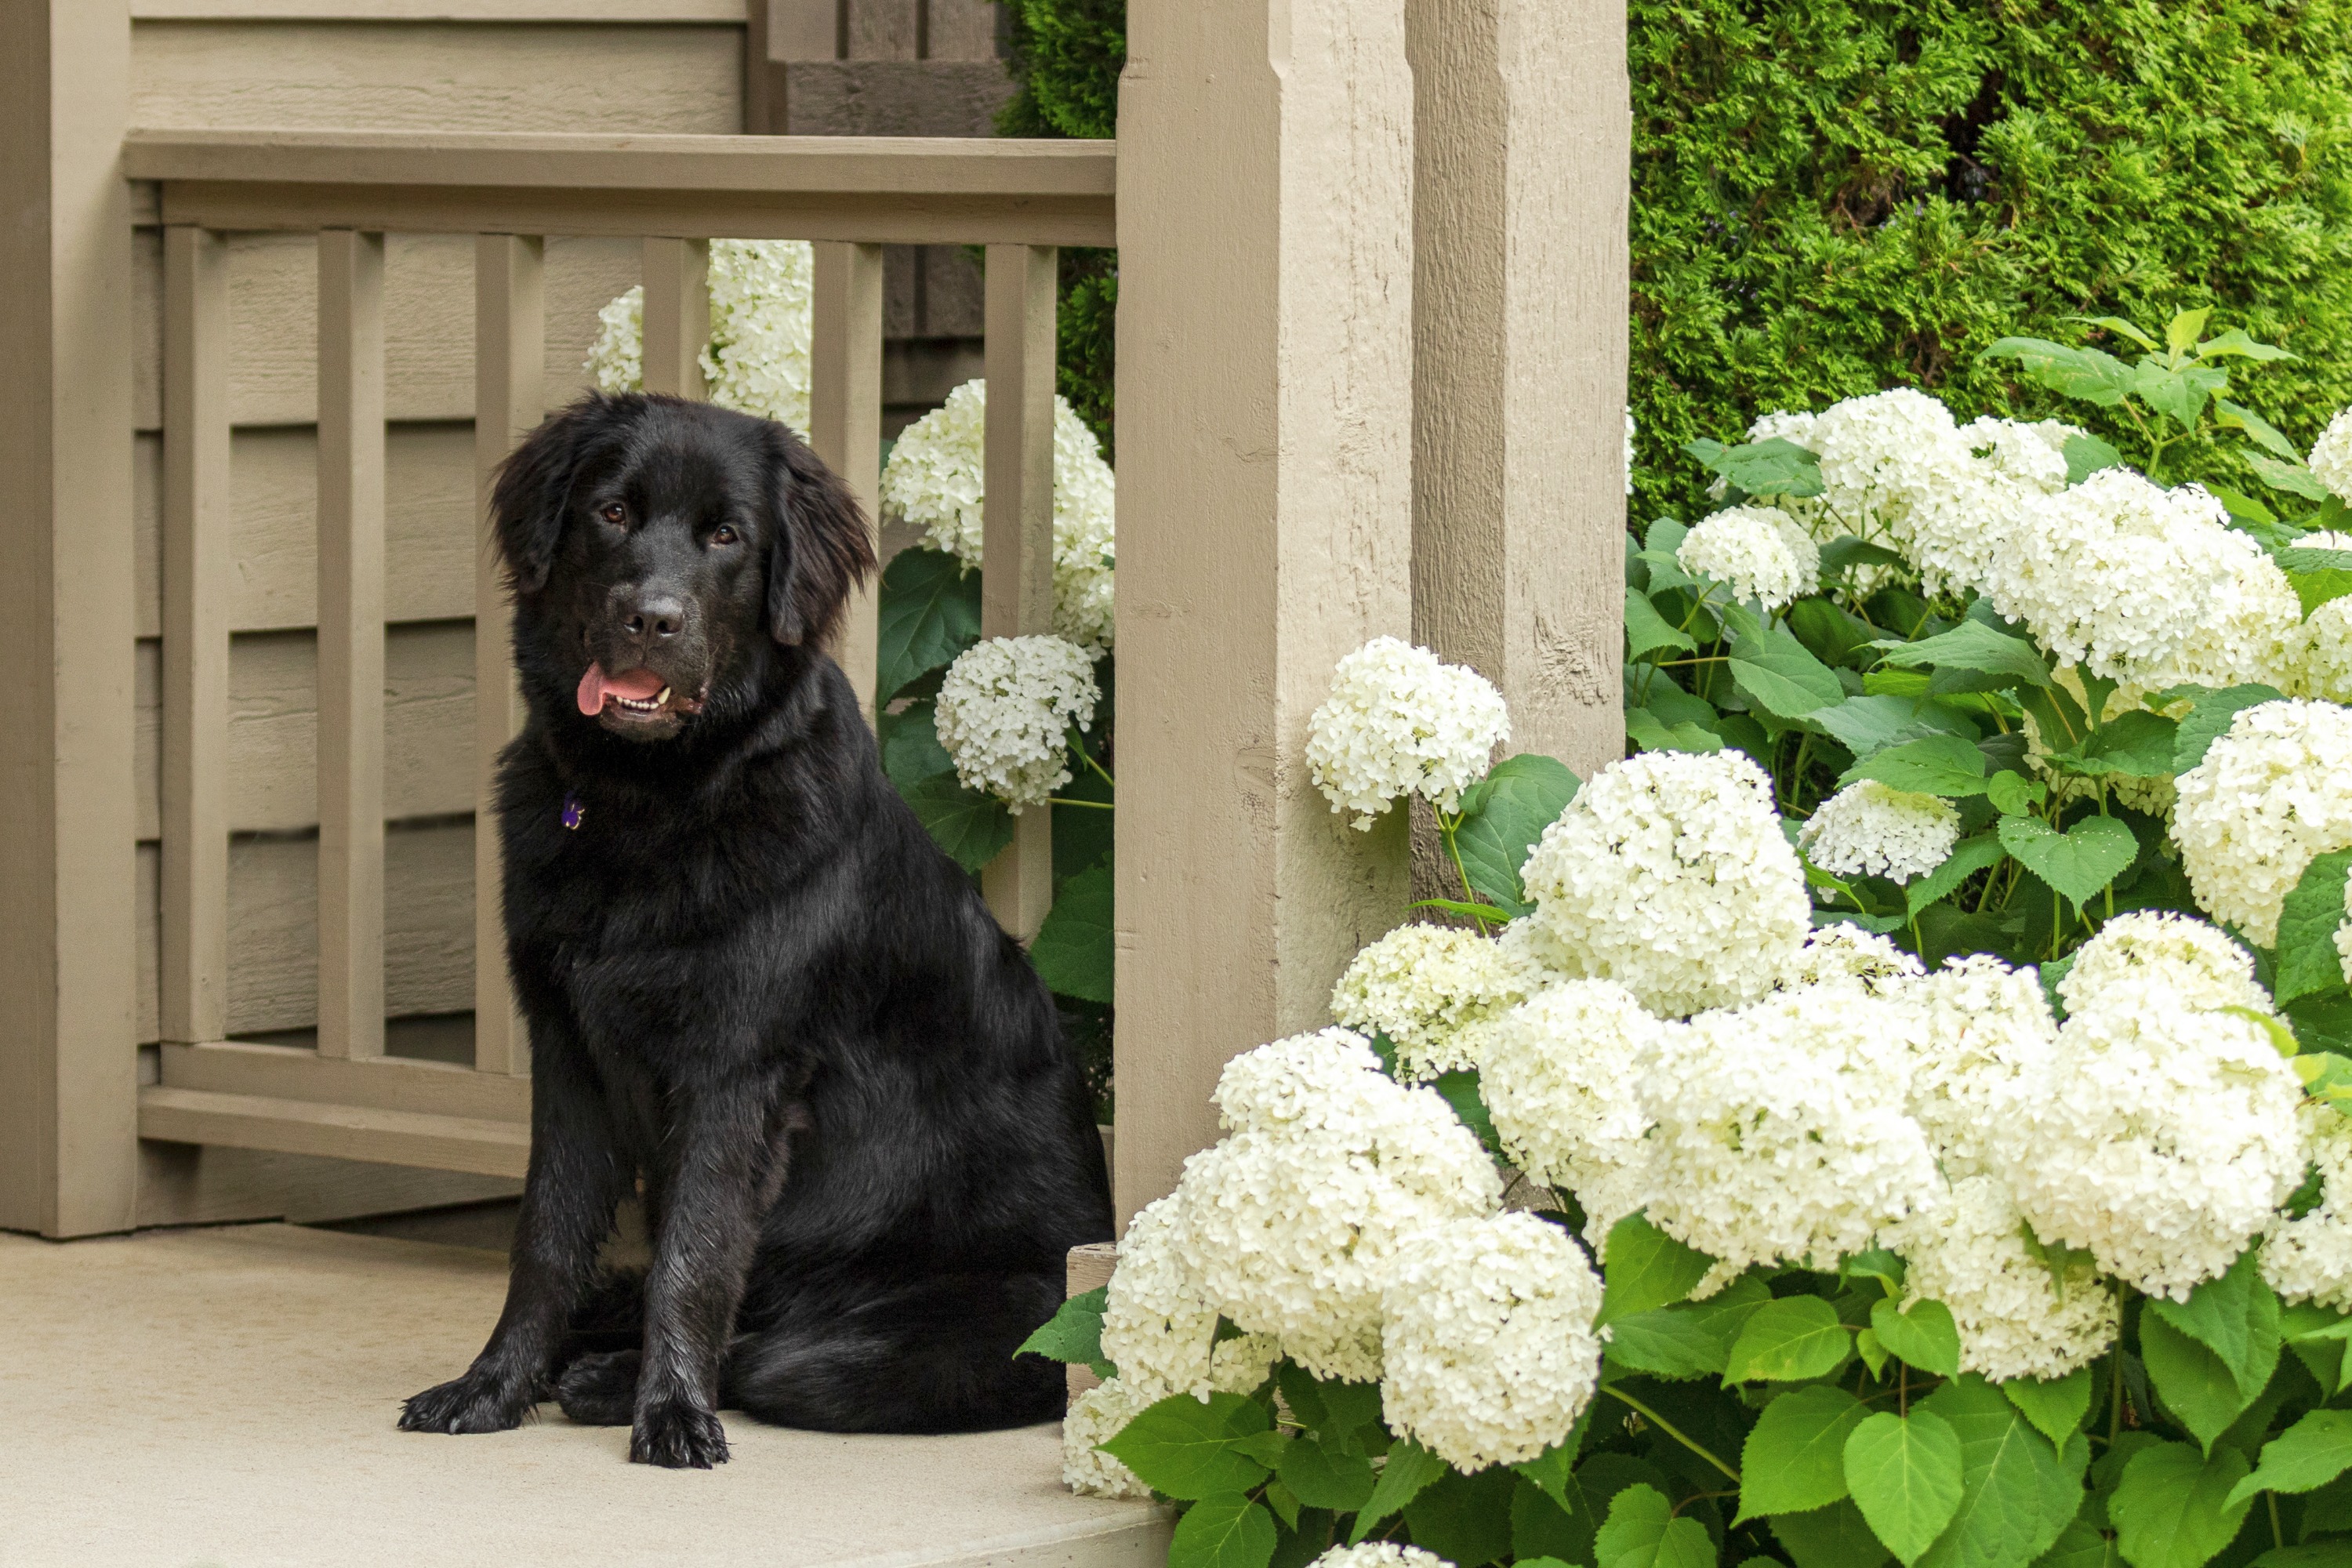 A black newfoundland puppy on a brown porch of a home next to a large white hydrangea plant.